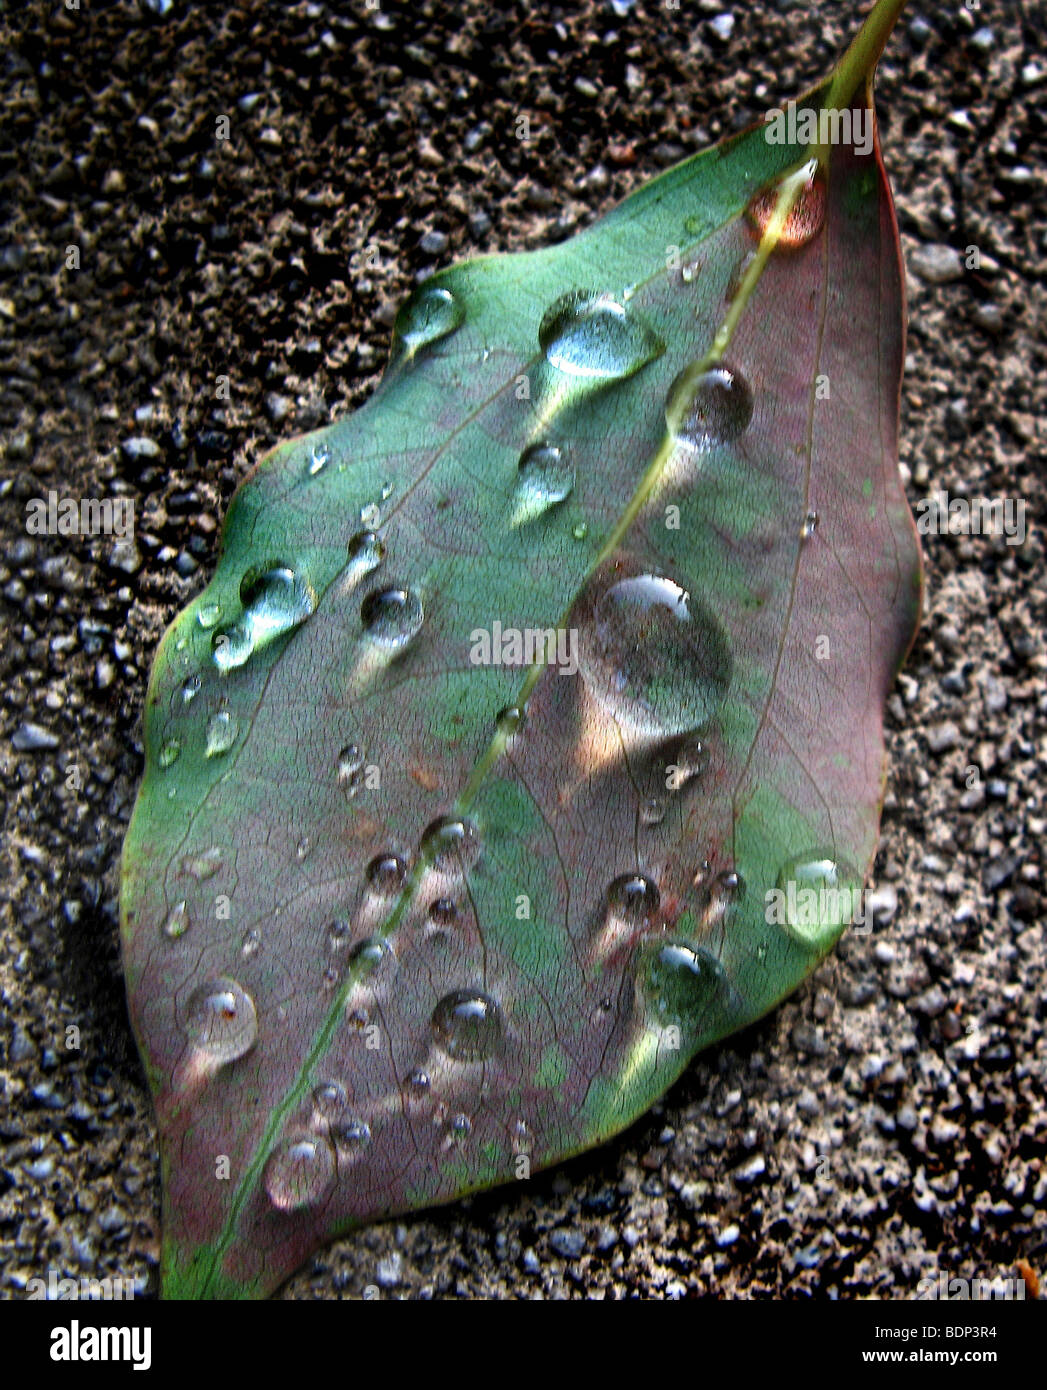 A leaf with water drops on ground Stock Photo